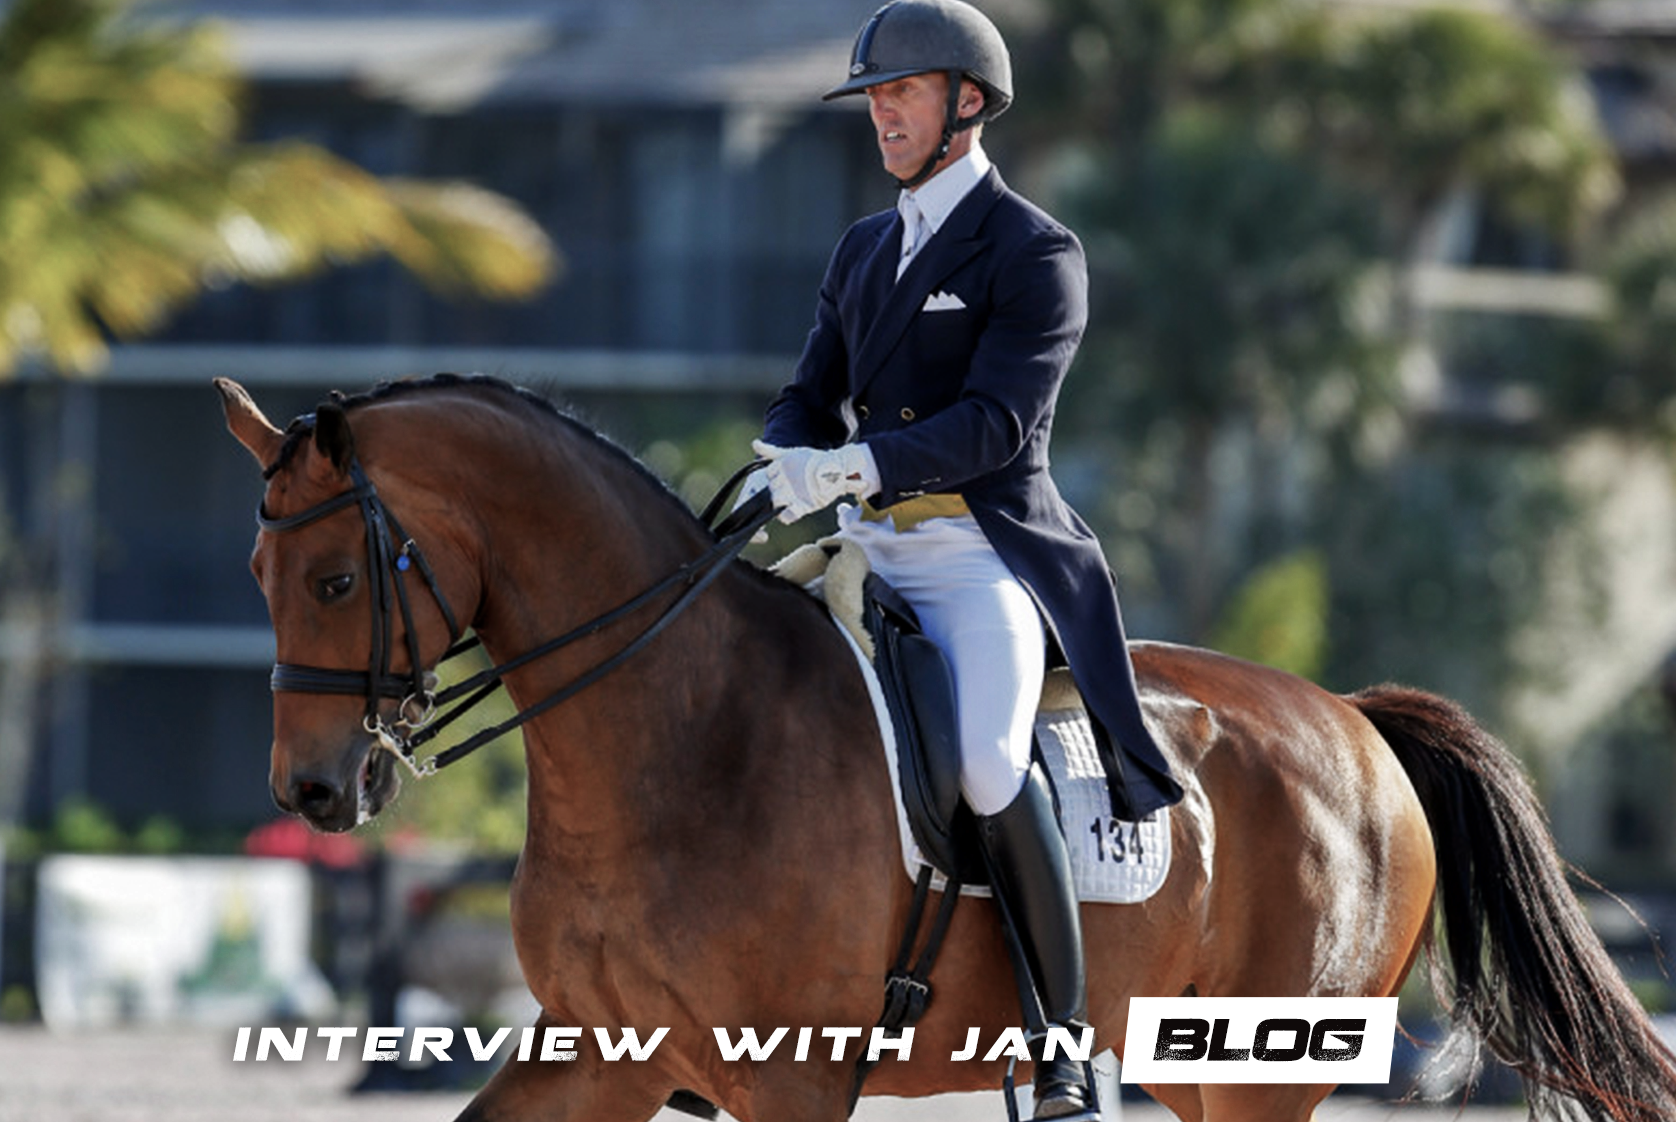 Jan Brons on Dressage and Physical Fitness